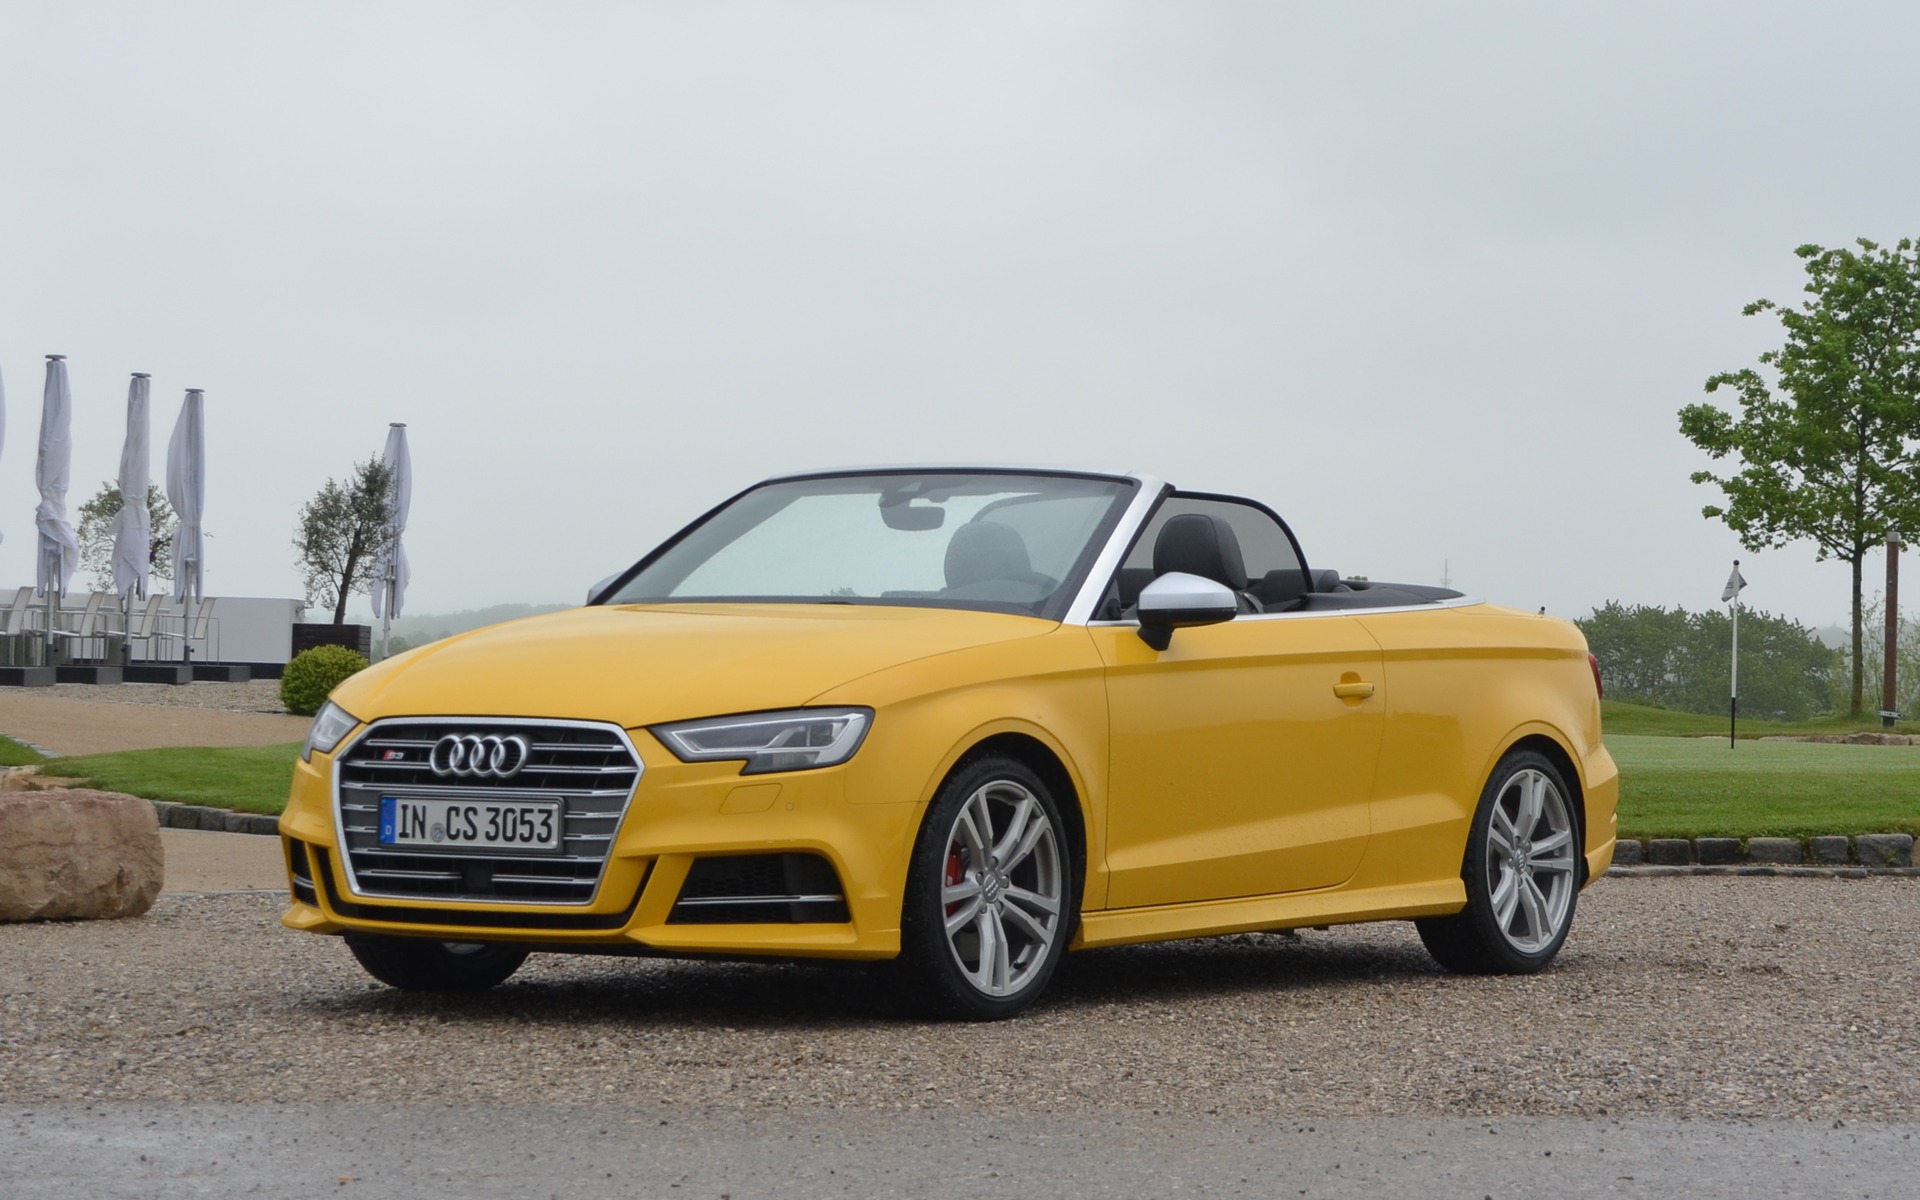 2017 Audi S3 Cabriolet (only the A3 Cabriolet will be sold in Canada)